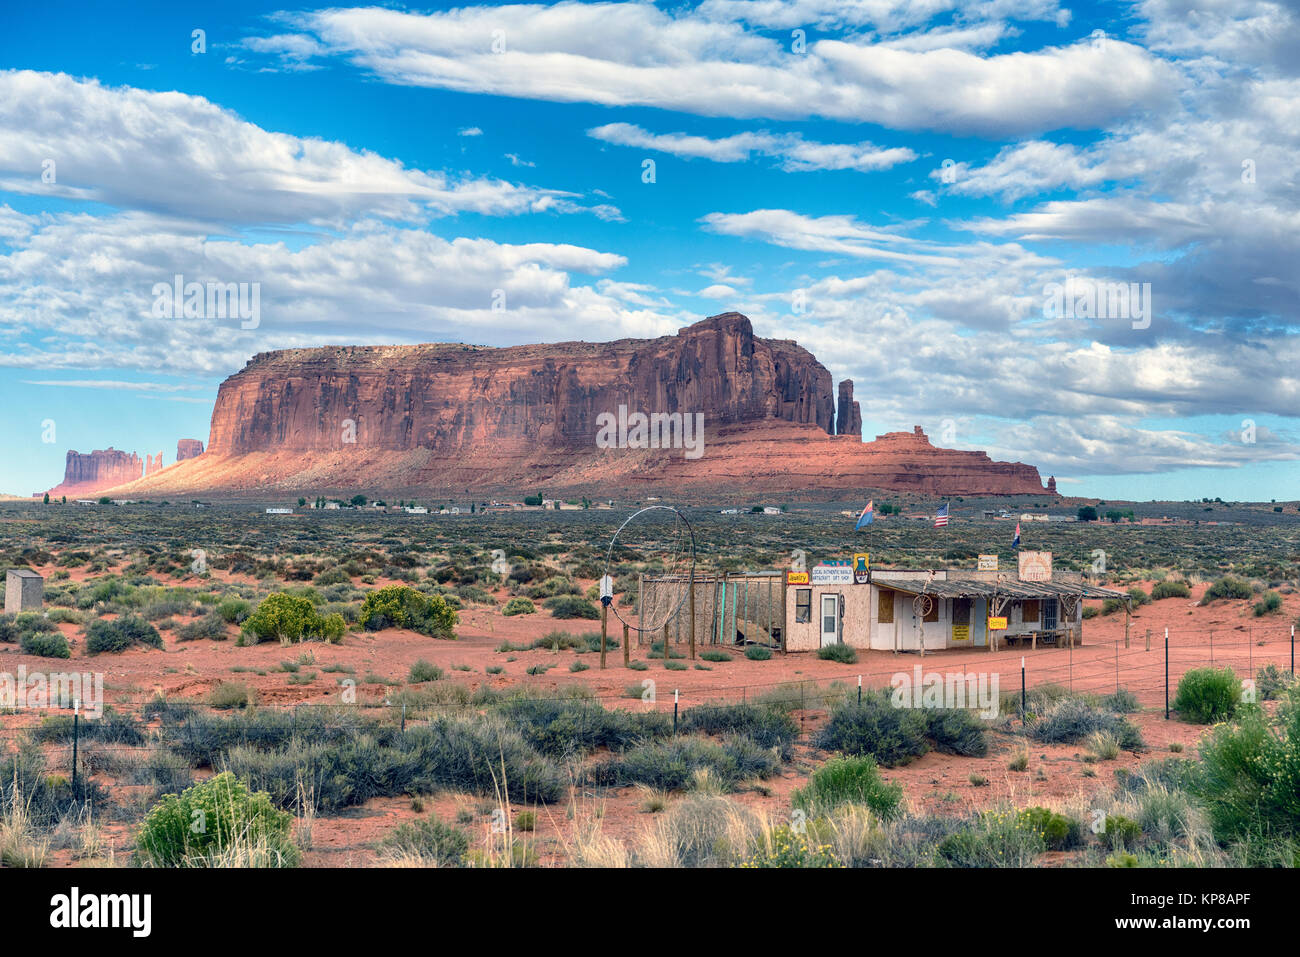 Abandoned tourist shop, note the large 'dream catcher' with Navajo settlement in the background. Arizona-Utah border, USA Stock Photo